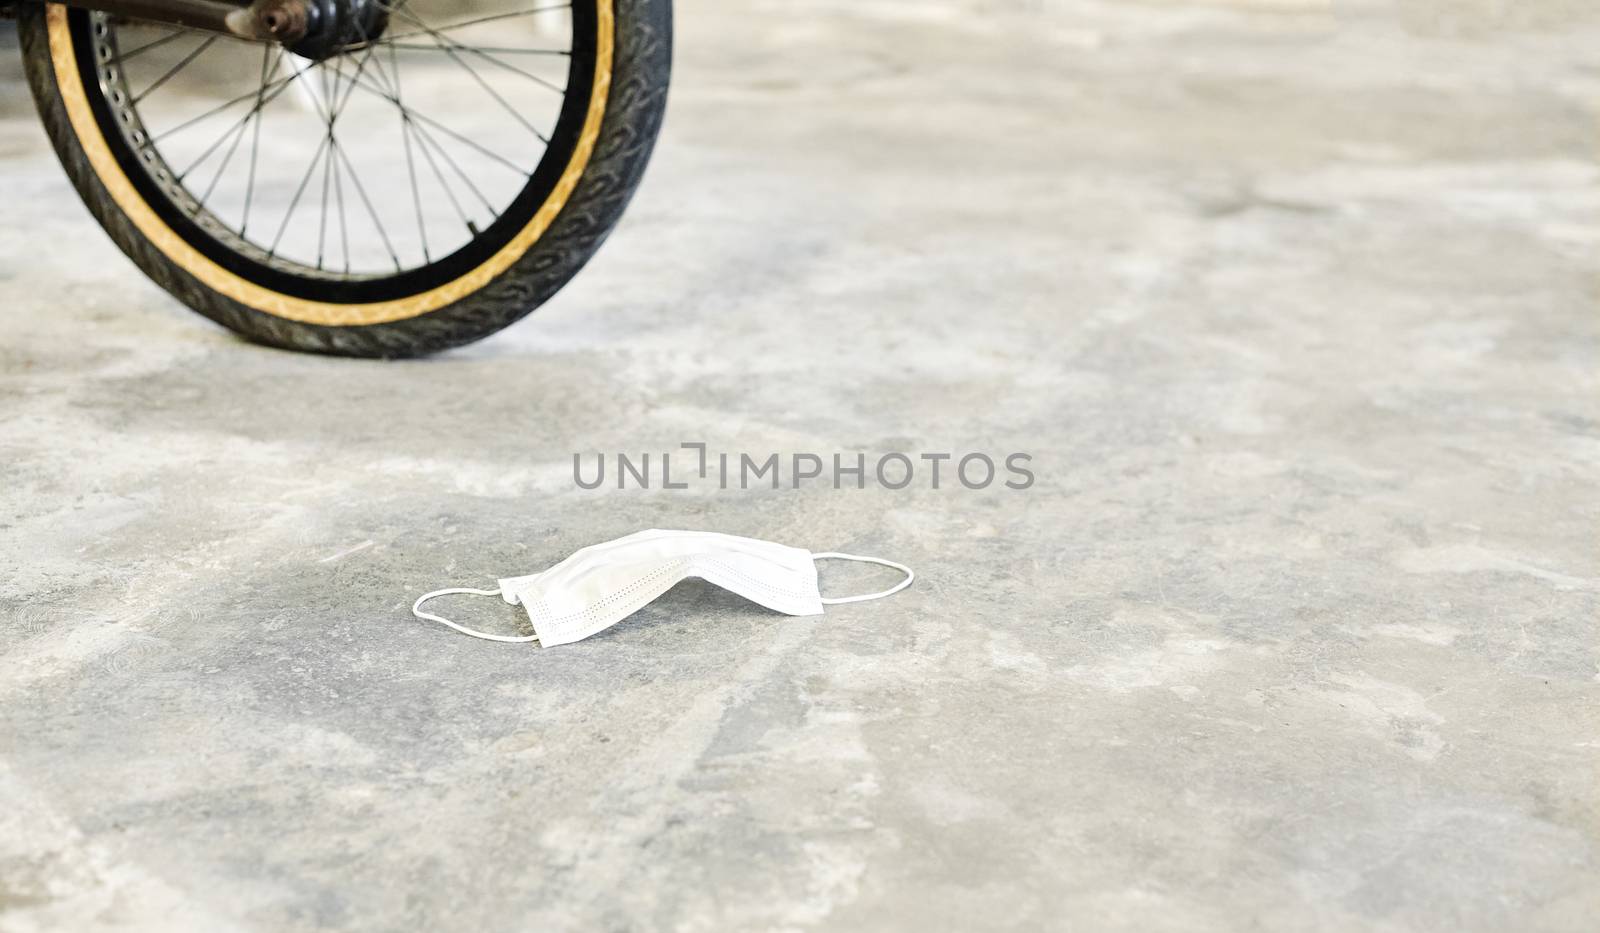 Mask lying on the ground with a bicycle wheel at the bottom in a time of new post-Coronavirus normality